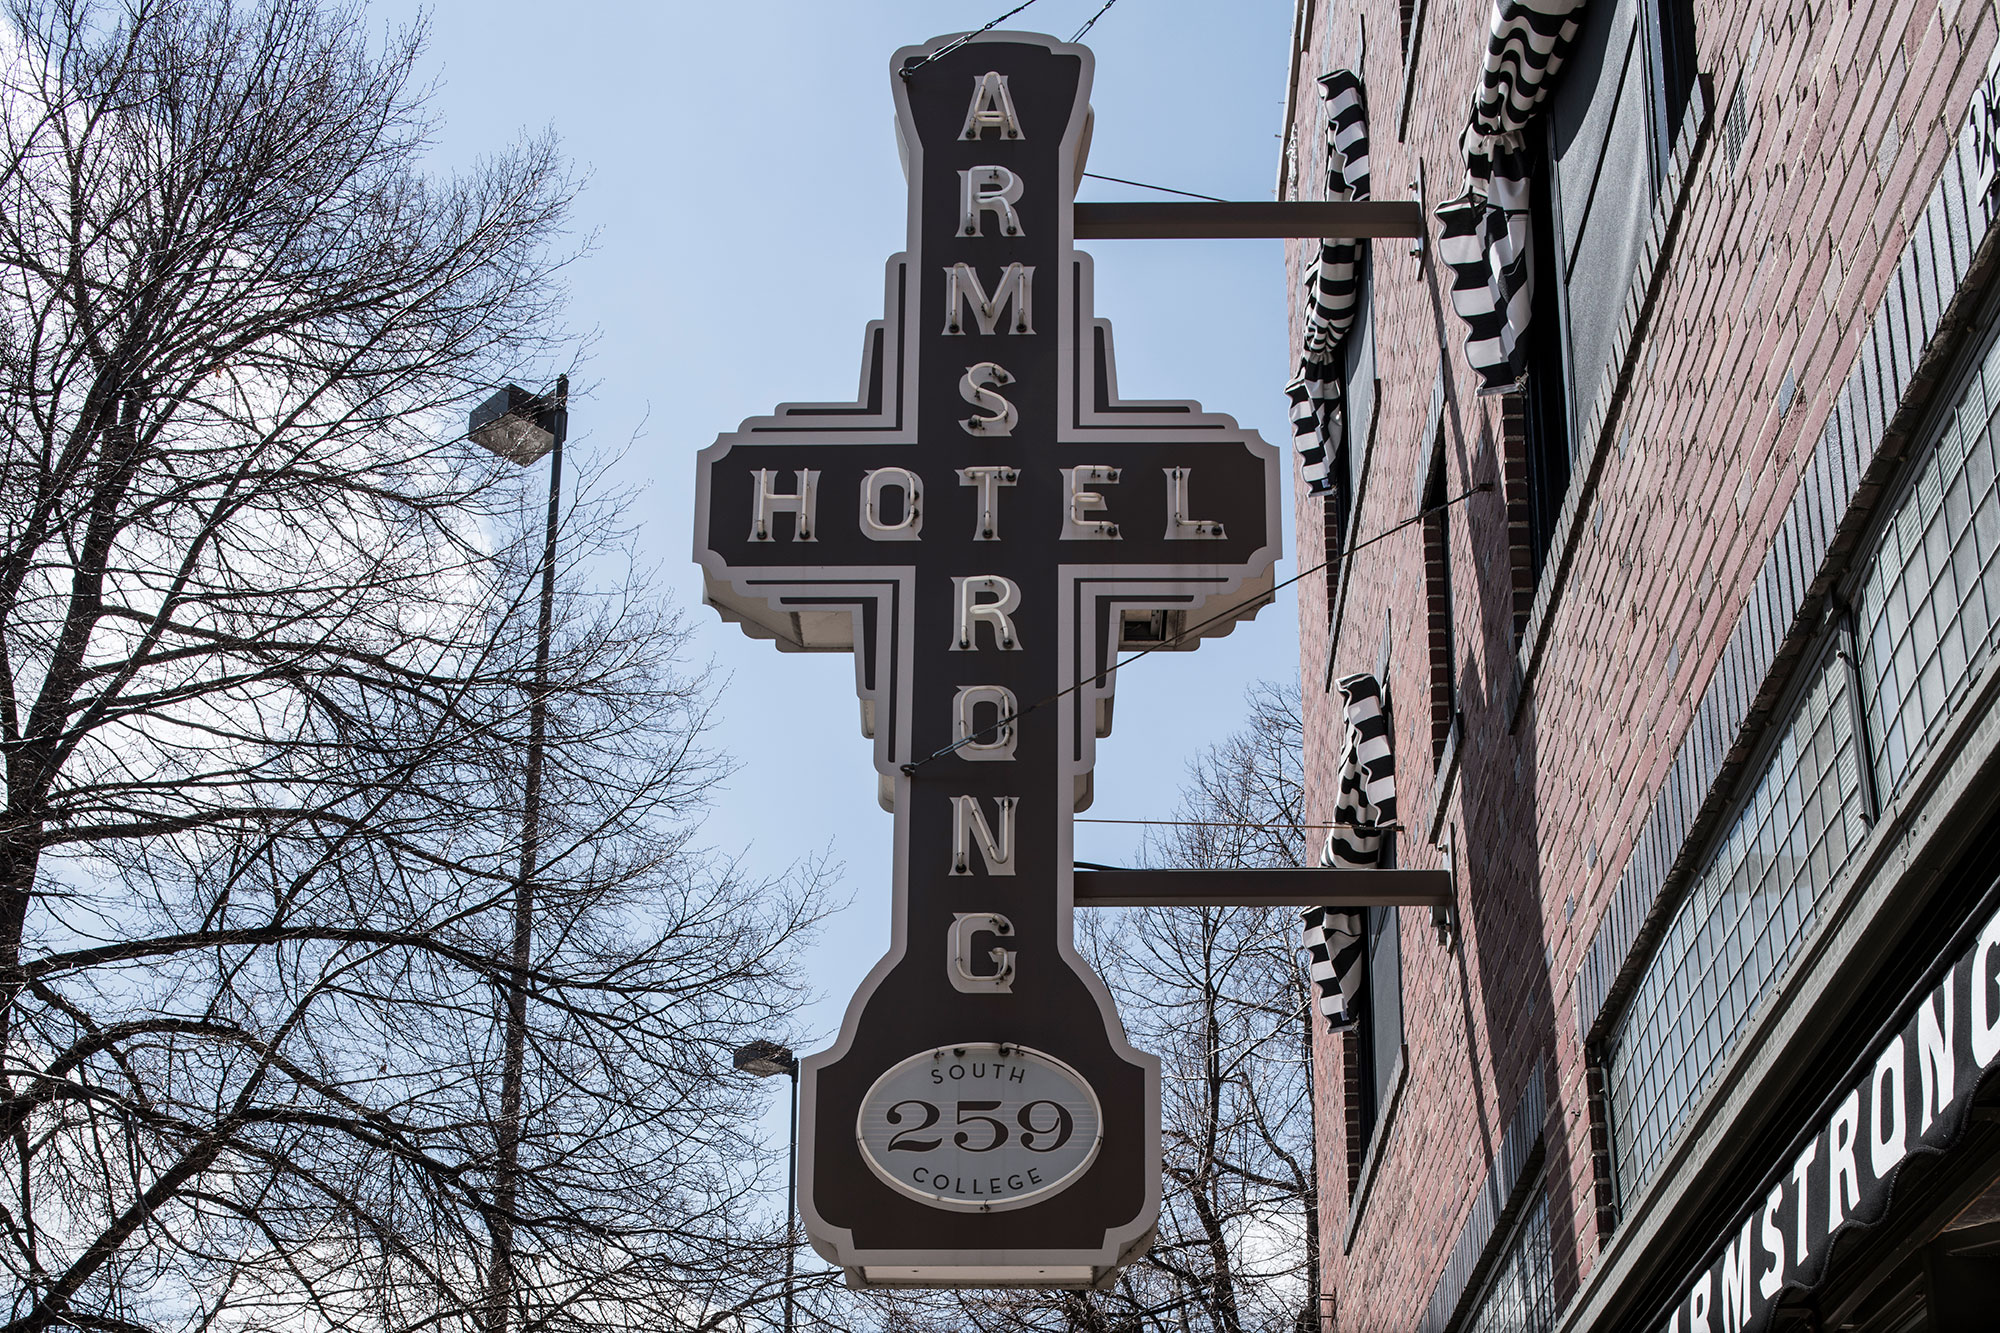 Armstrong Hotel Sign 259 South College Avenue 